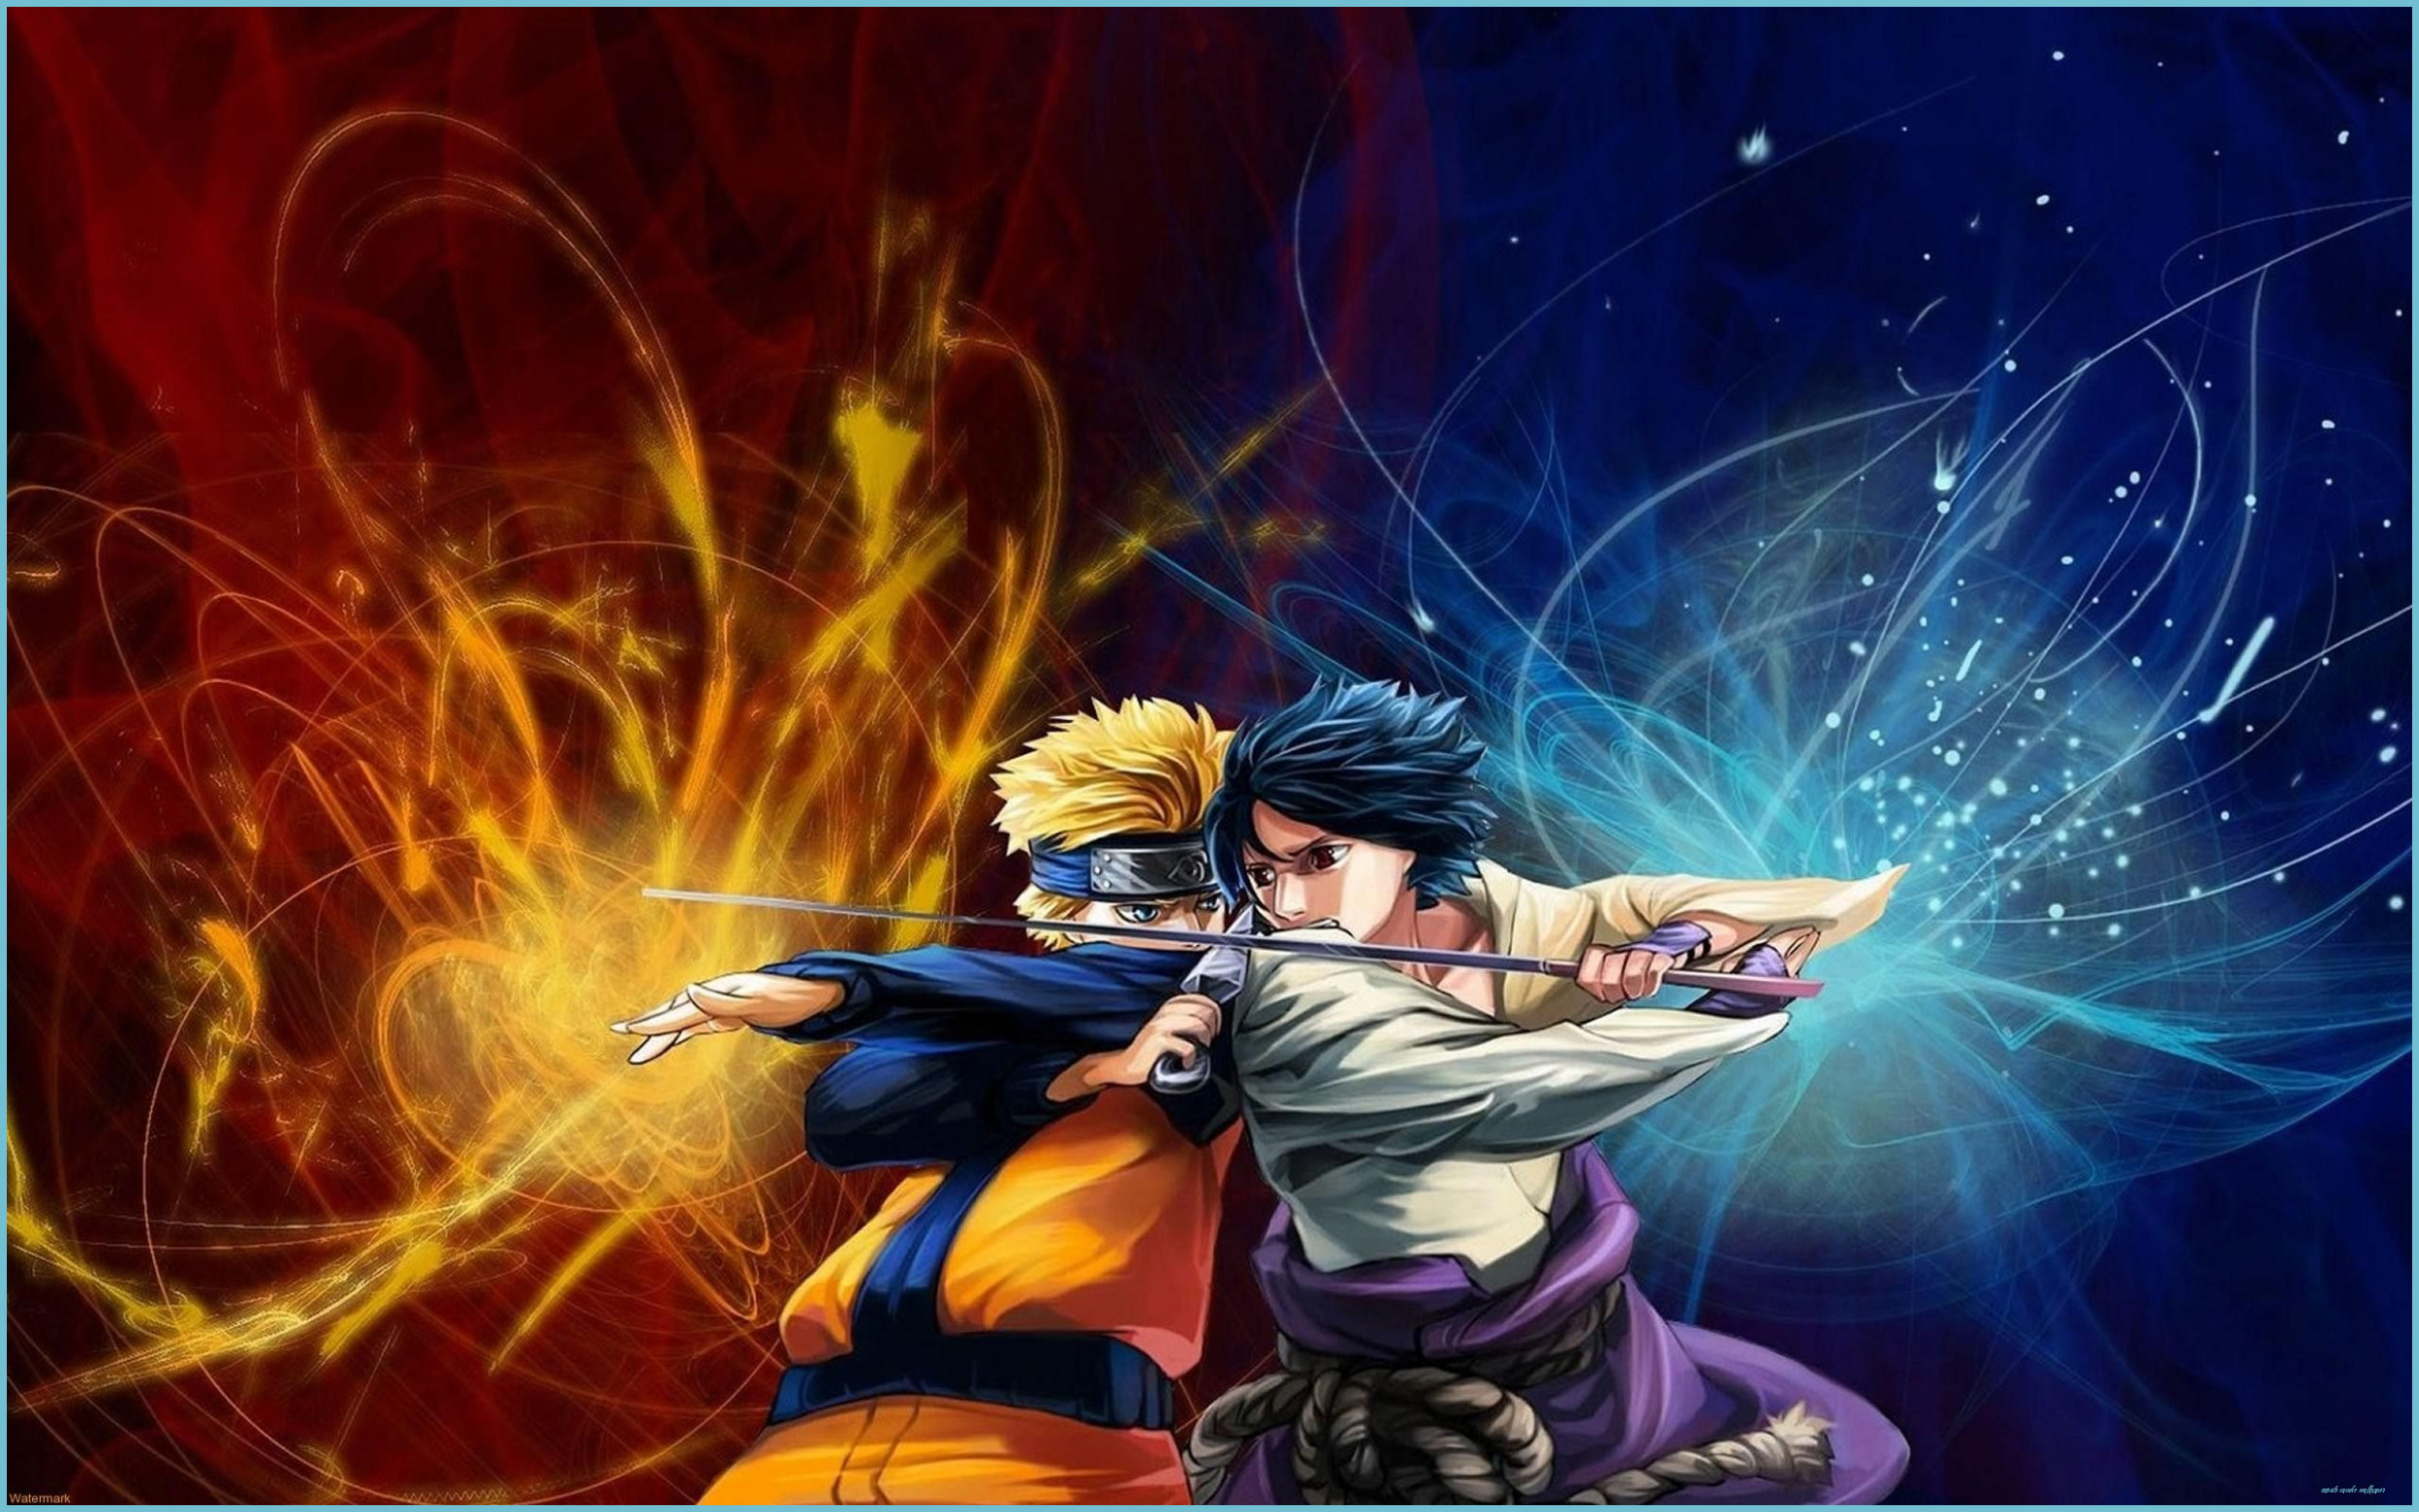 Naruto Wallpaper HD (73+ pictures)  Hd anime wallpapers, Naruto wallpaper,  Anime wallpaper